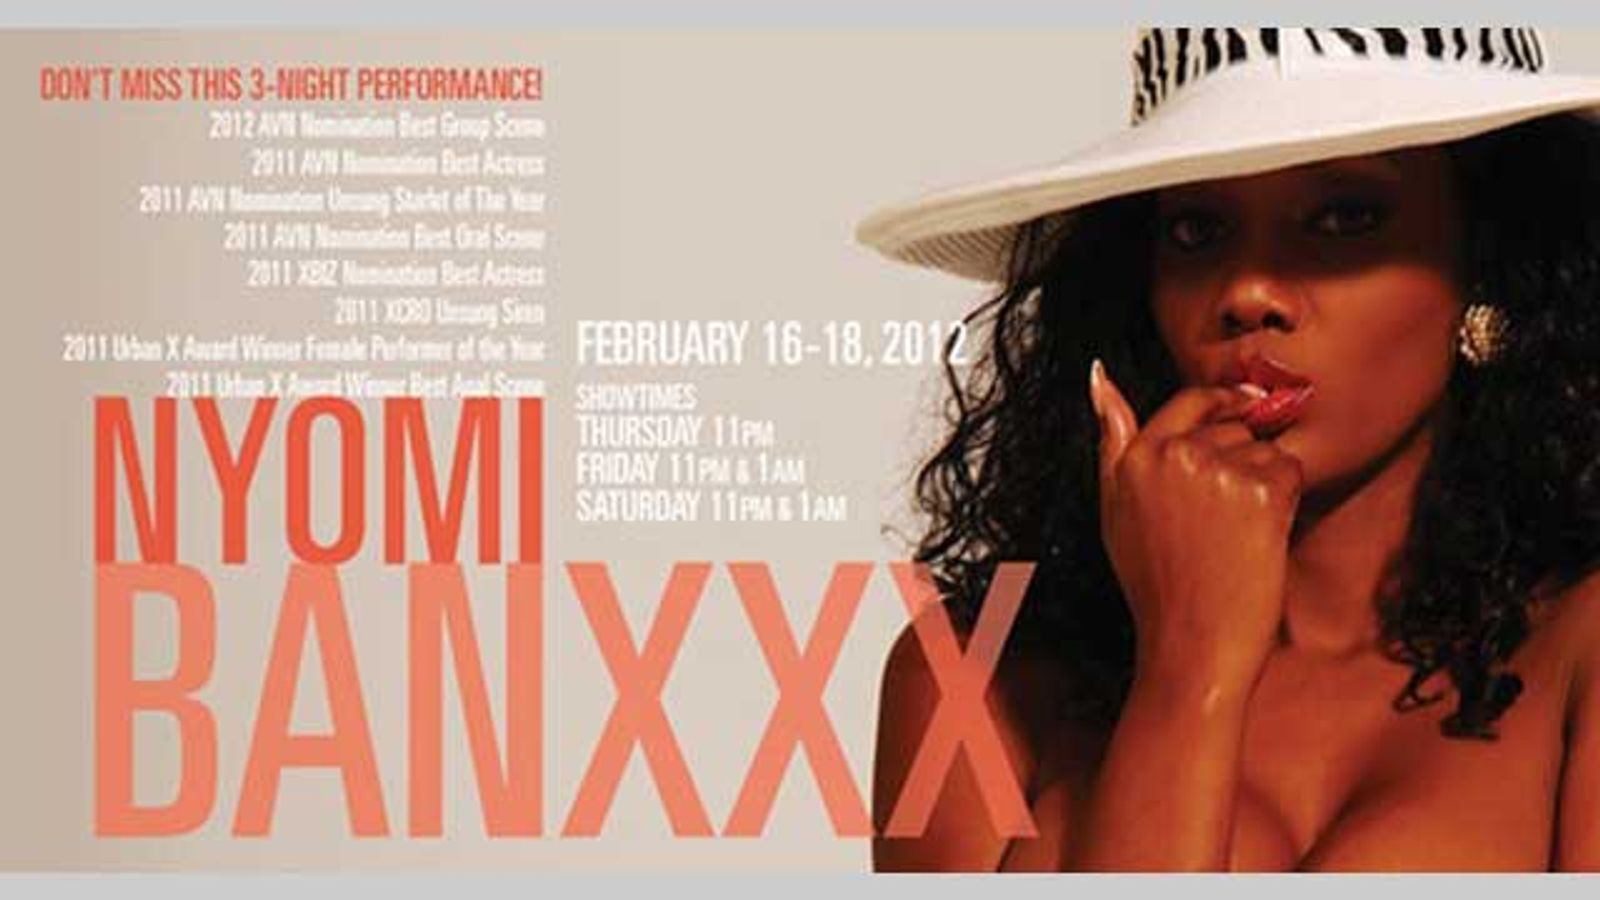 Nyomi Banxxx's LA Feature Dancing Debut at Rouge Thursday